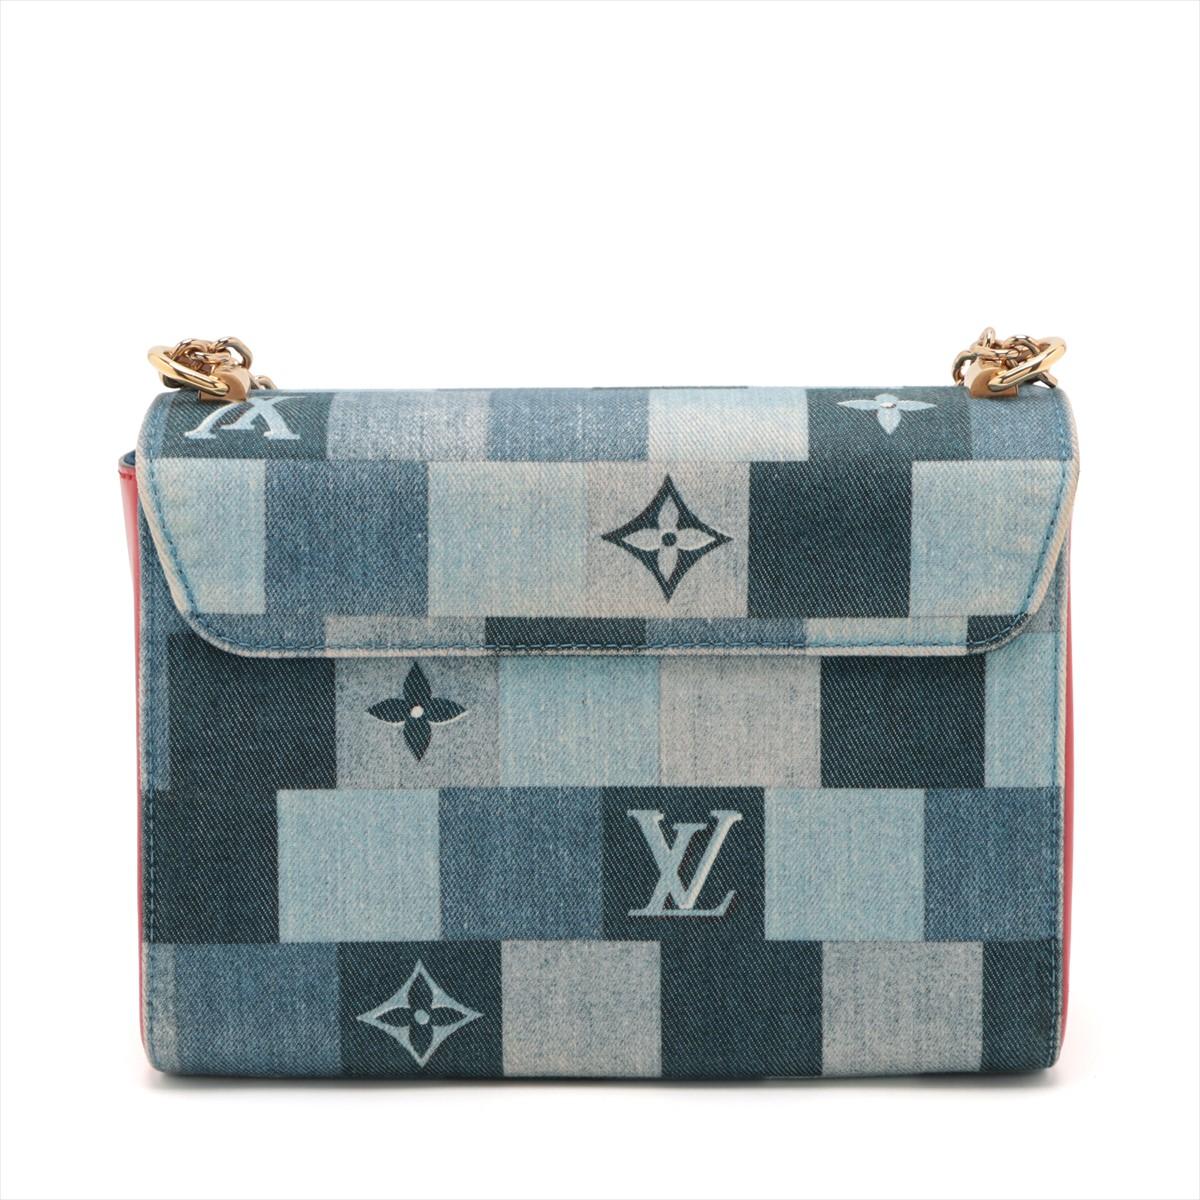 Louis Vuitton Denim Damier Twist MM Bag In Good Condition For Sale In Indianapolis, IN